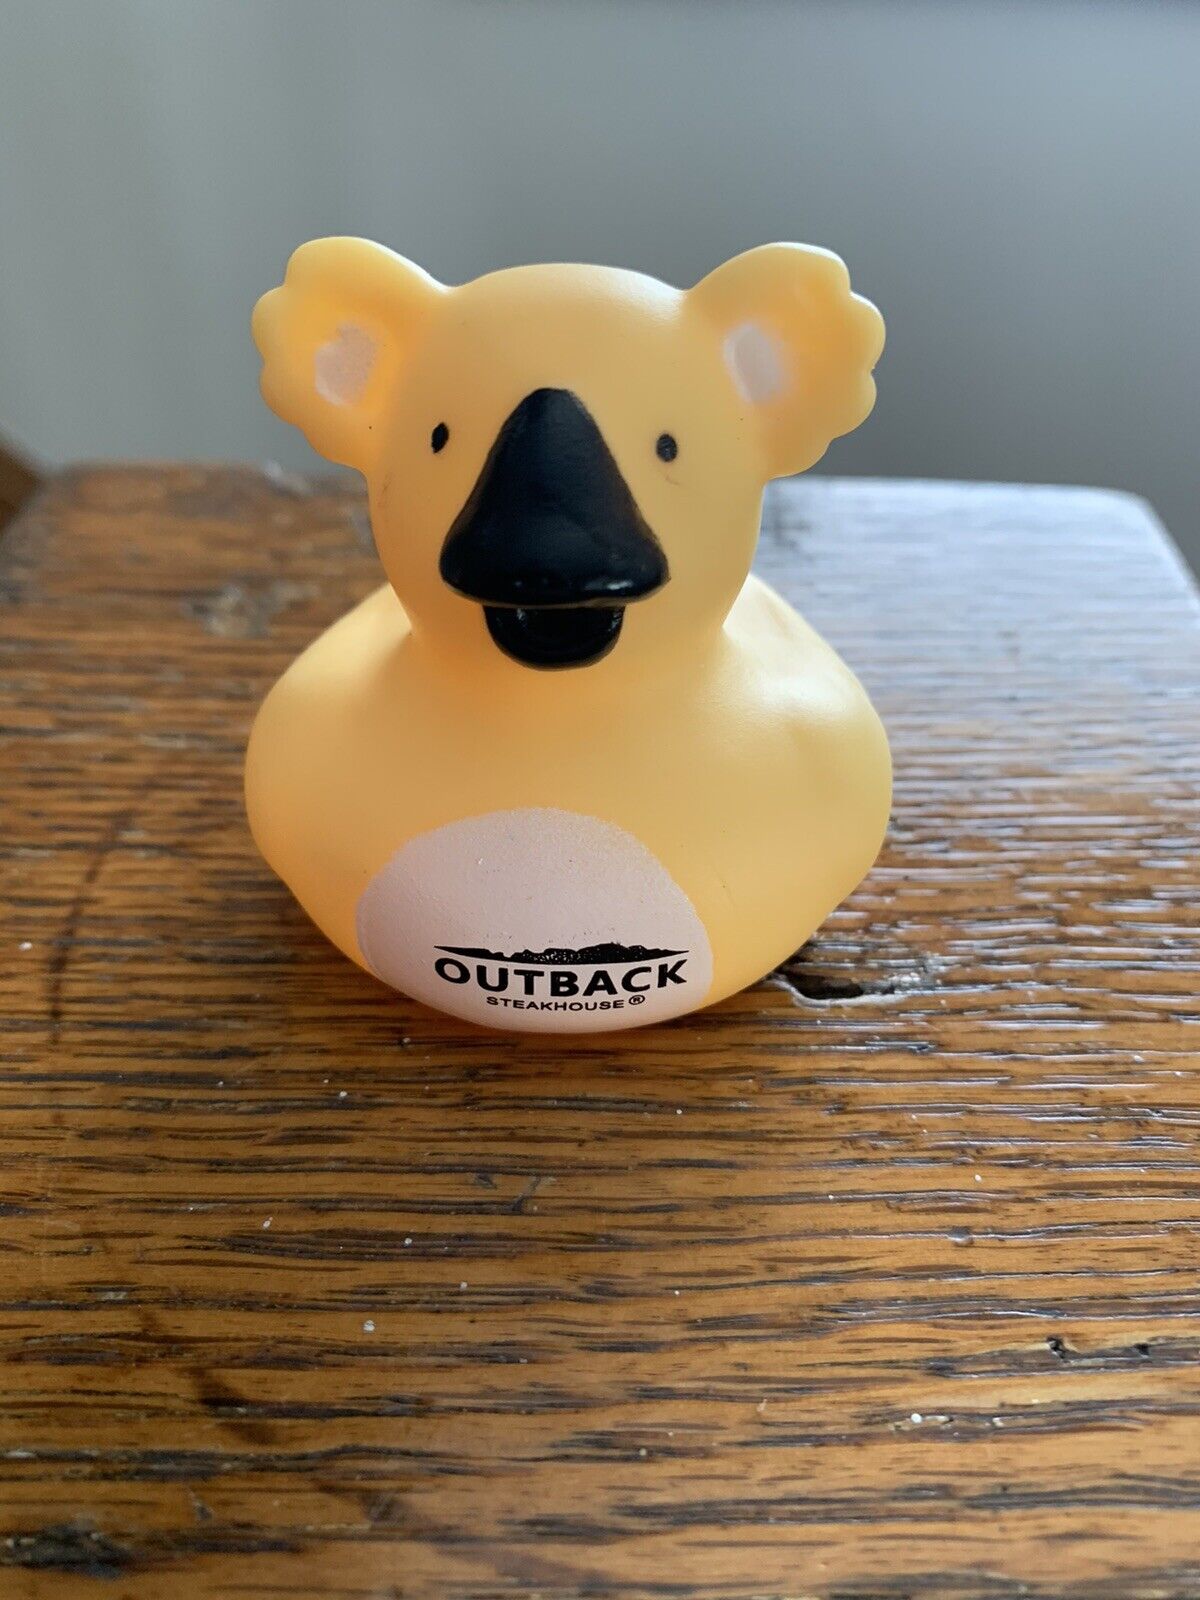 Limited Edition 2” Outback Steakhouse Exclusive Koala Bear Rubber Ducks “New